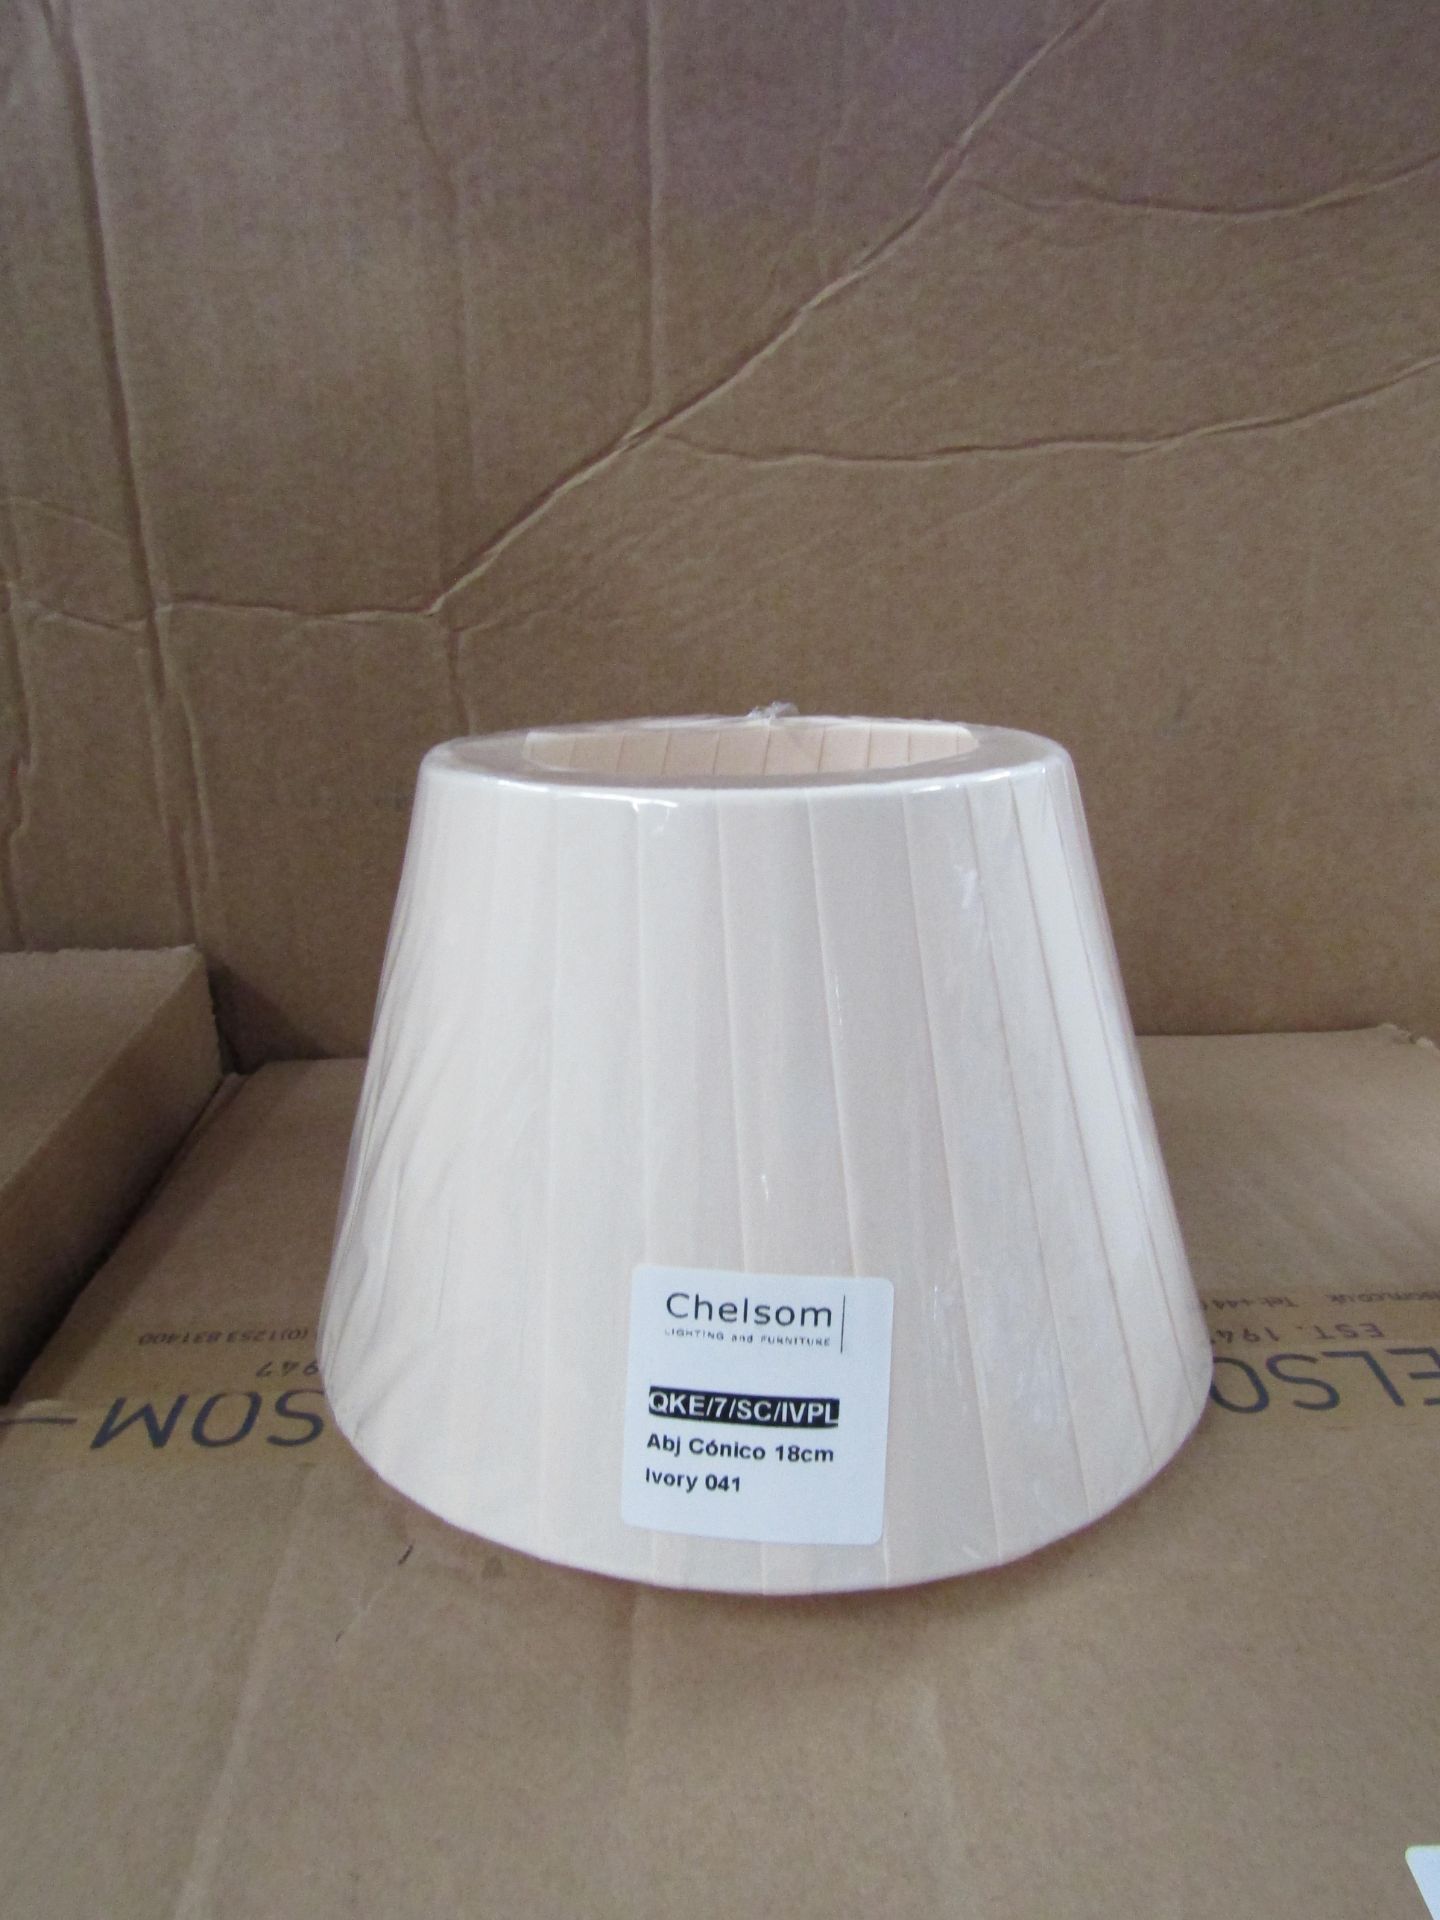 Approx 30x Chelsom Small Shades, (QKE/7/SC/IVPL) Ivory 18cm, Unused & Packaged.